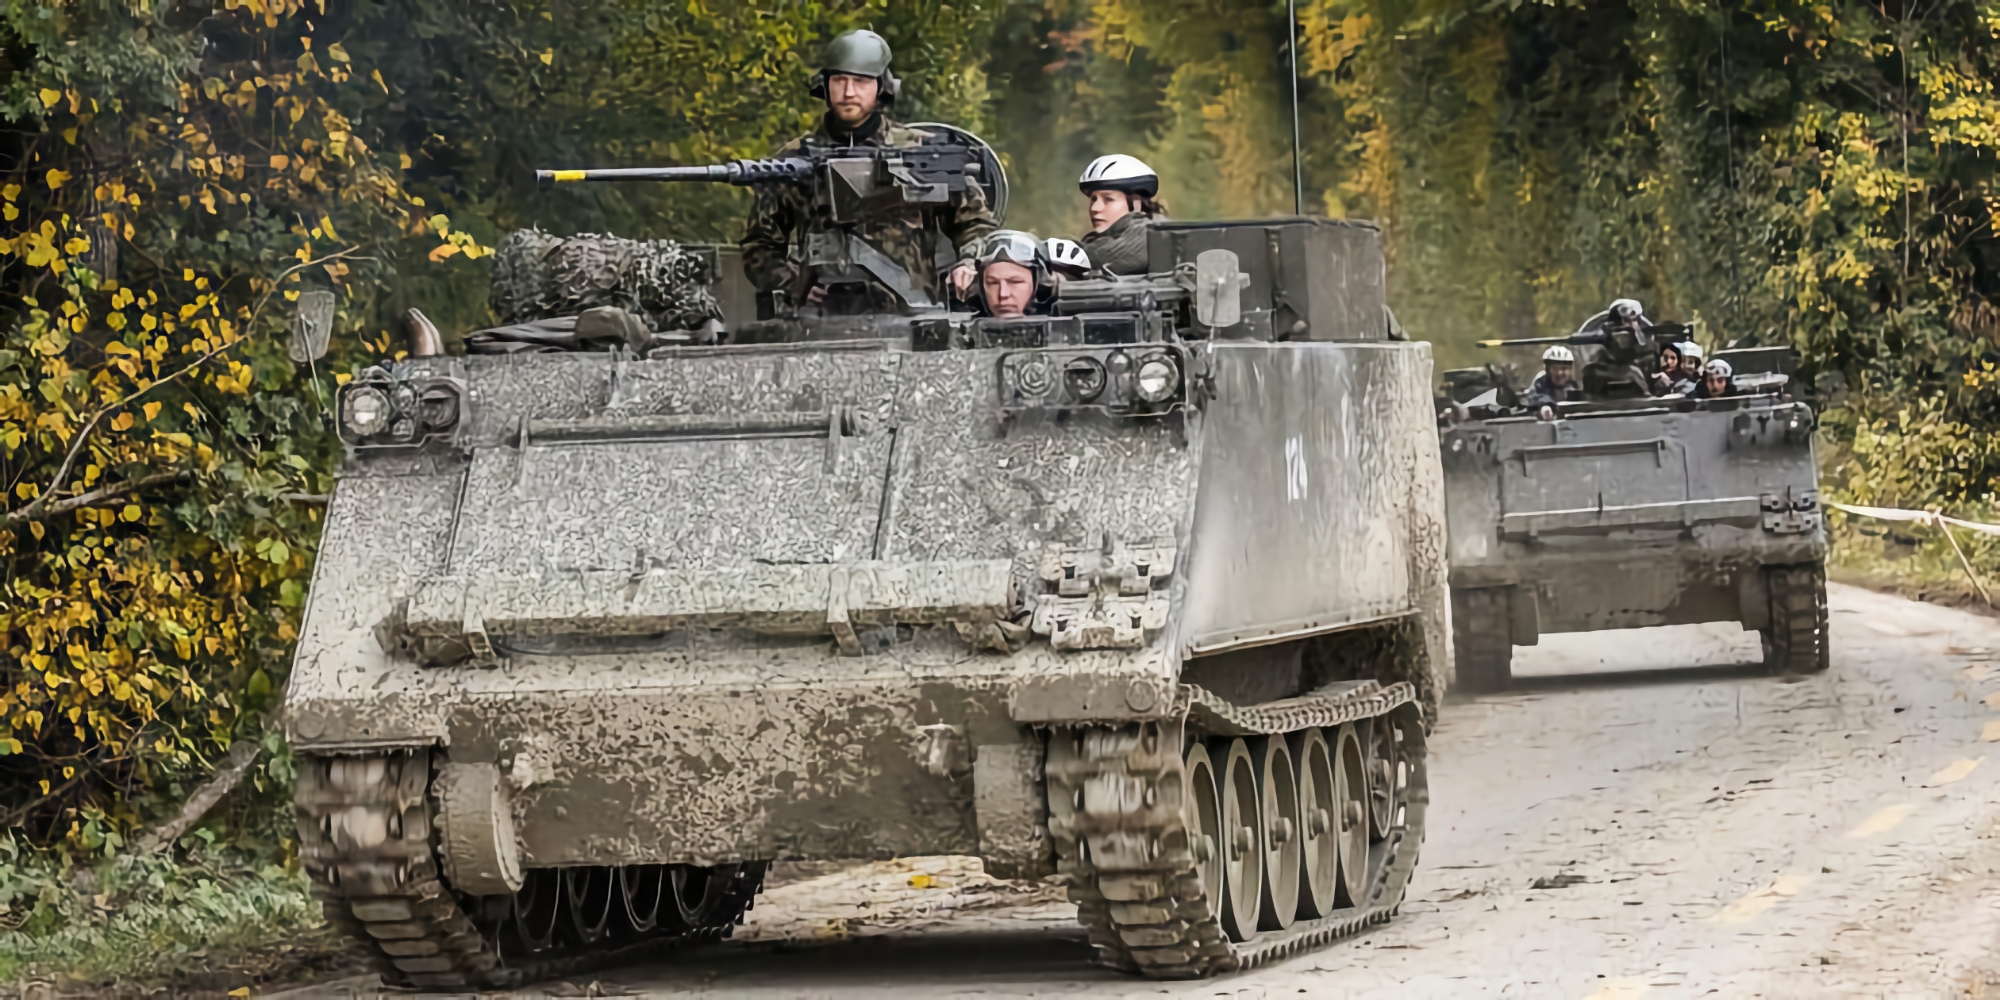 M113 armored personnel carriers, which were transferred by Lithuania, are already fighting at the front